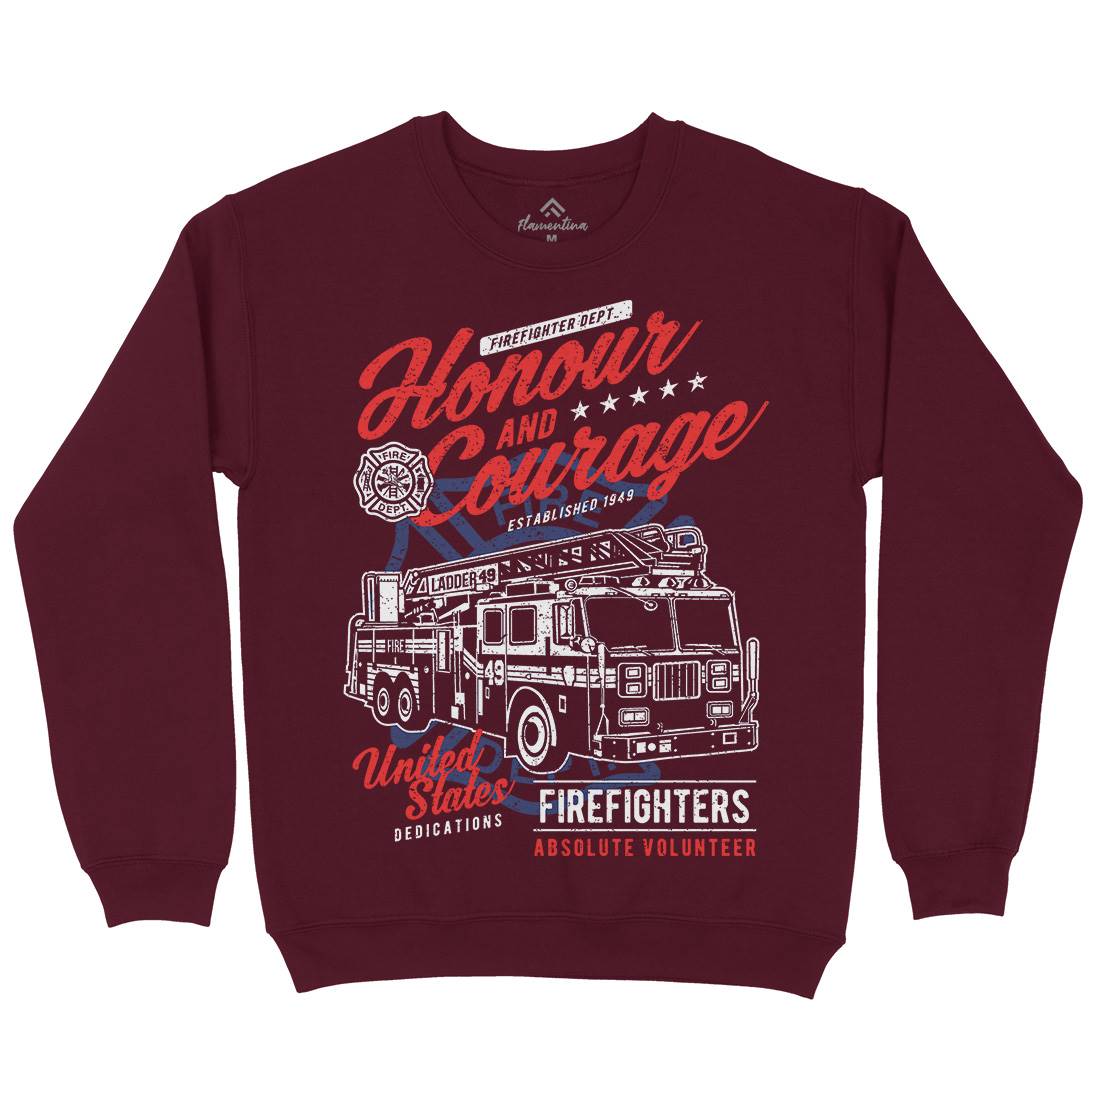 Honour And Courage Kids Crew Neck Sweatshirt Firefighters A684